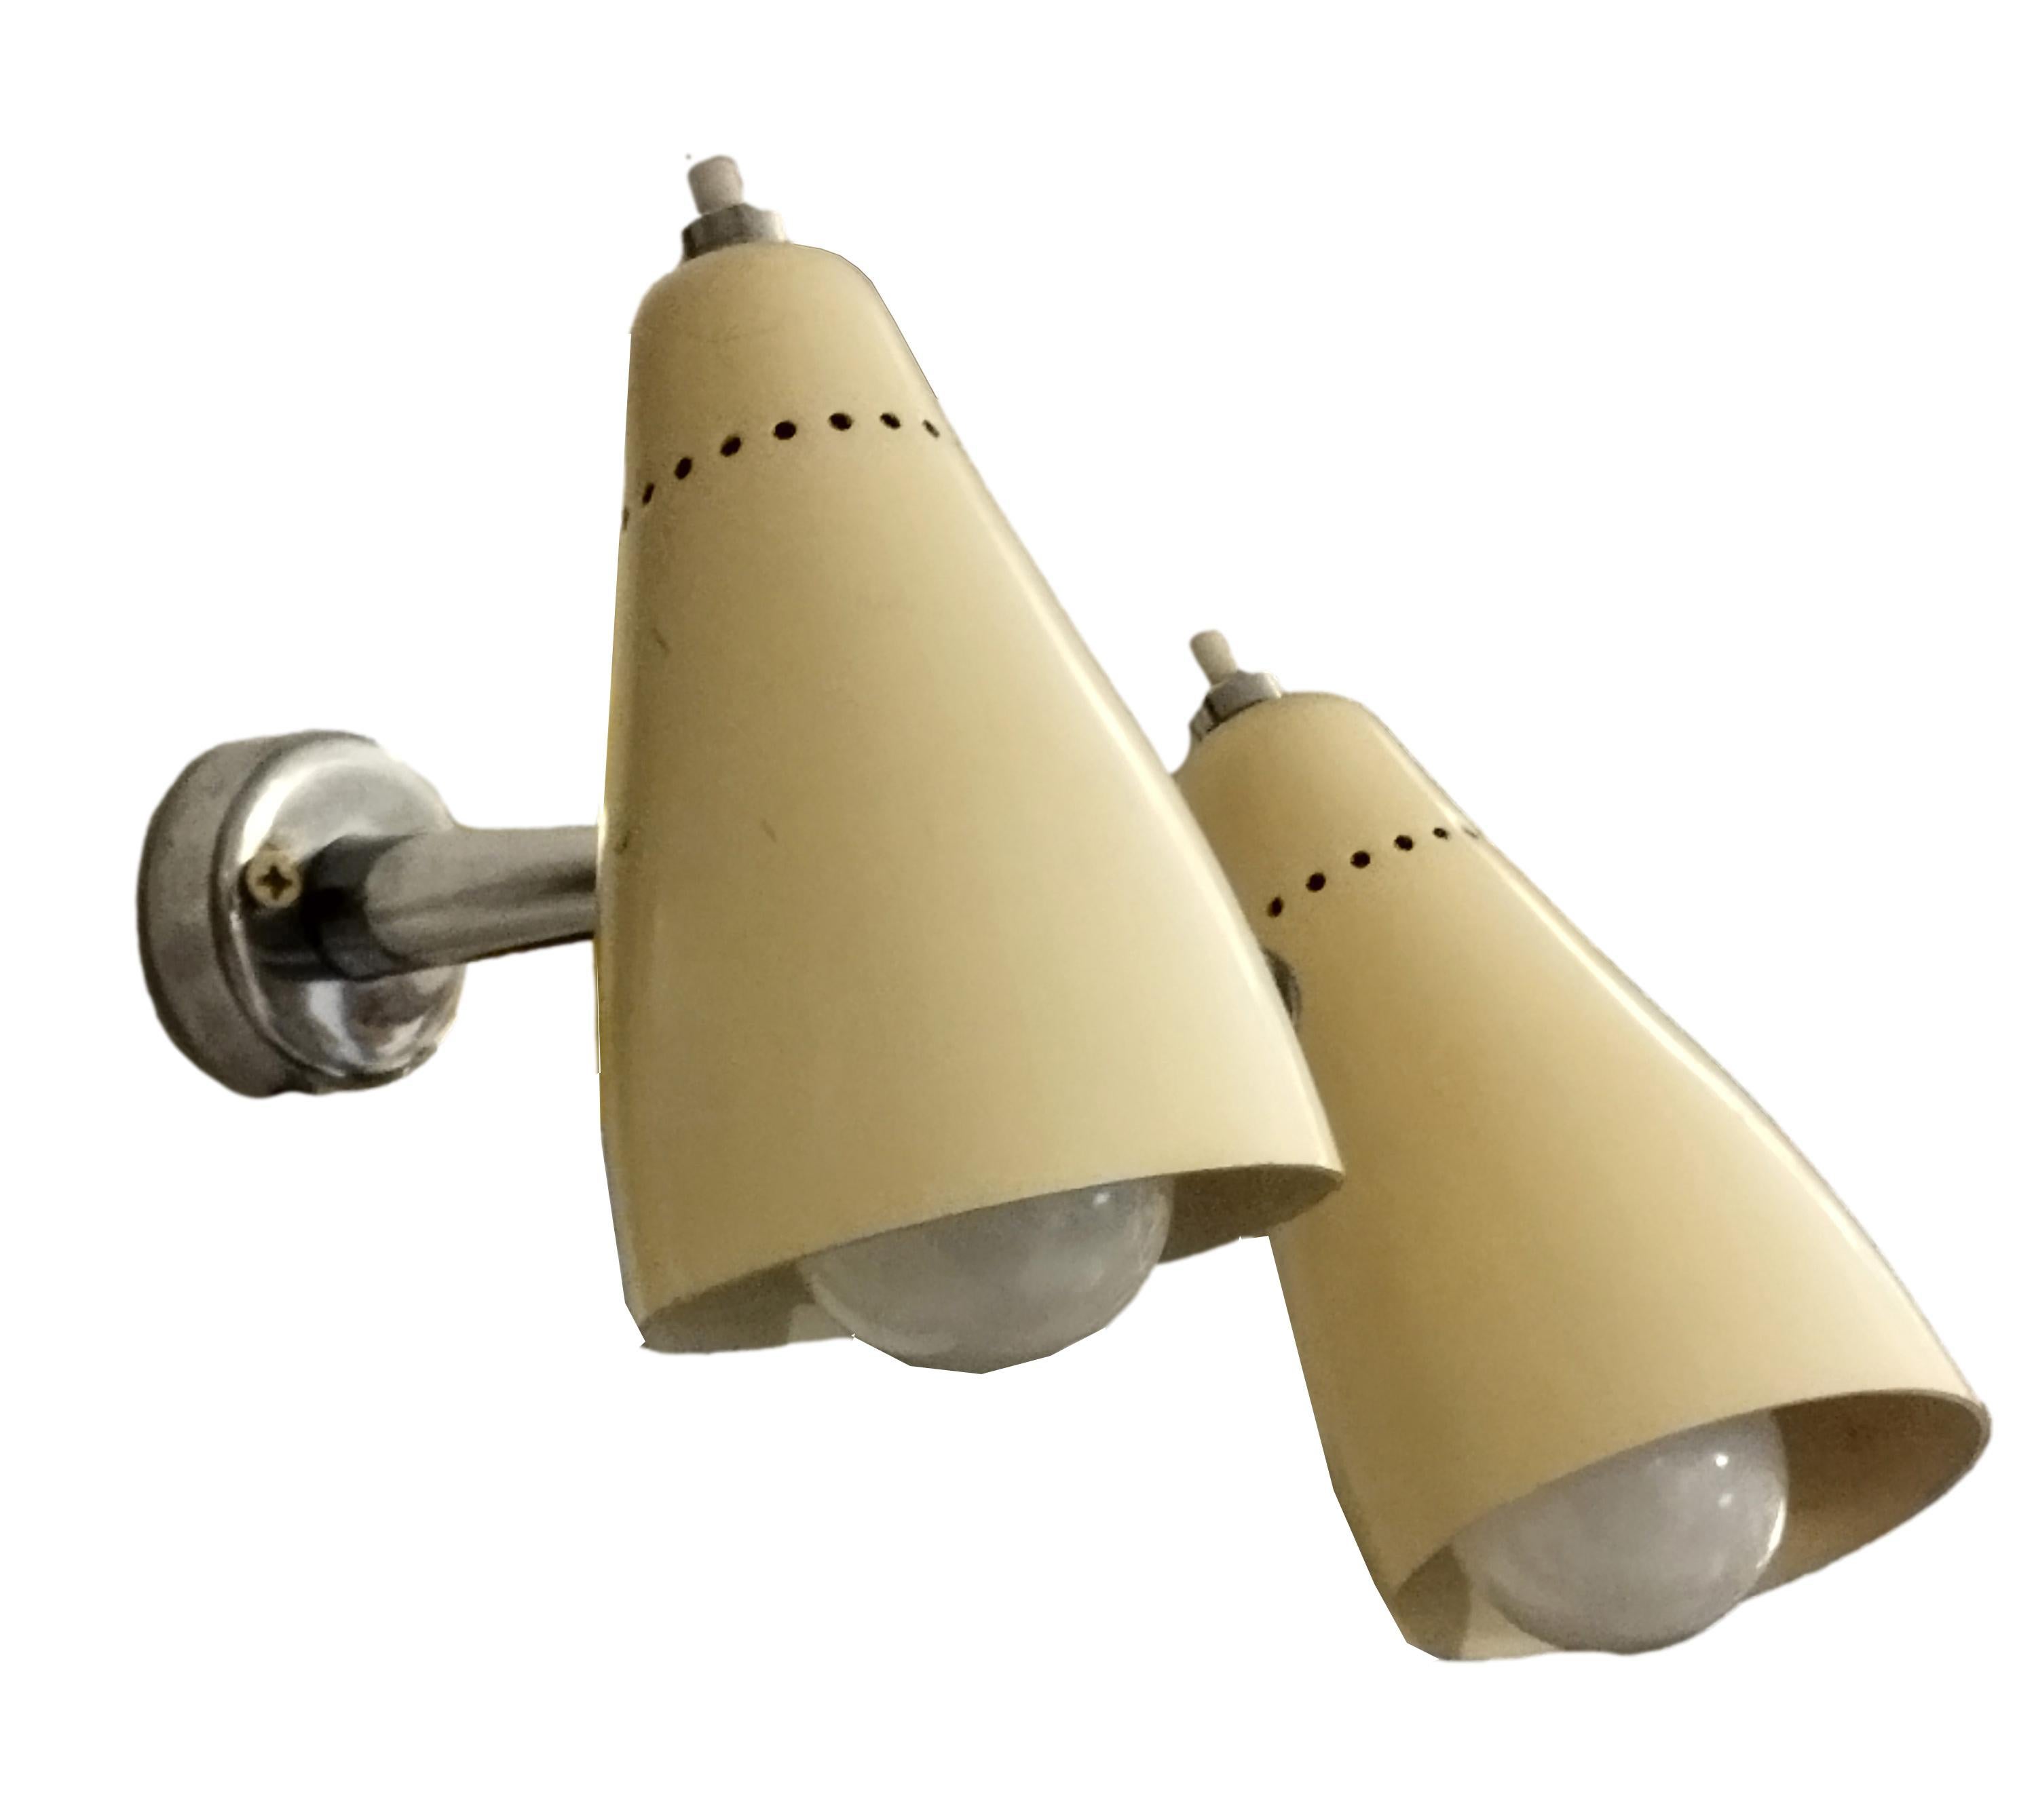 Gilded brass circular base wall sconce with conical stem ending in two spherical joints that accommodate two cream lacquered metal conical reflectors.
